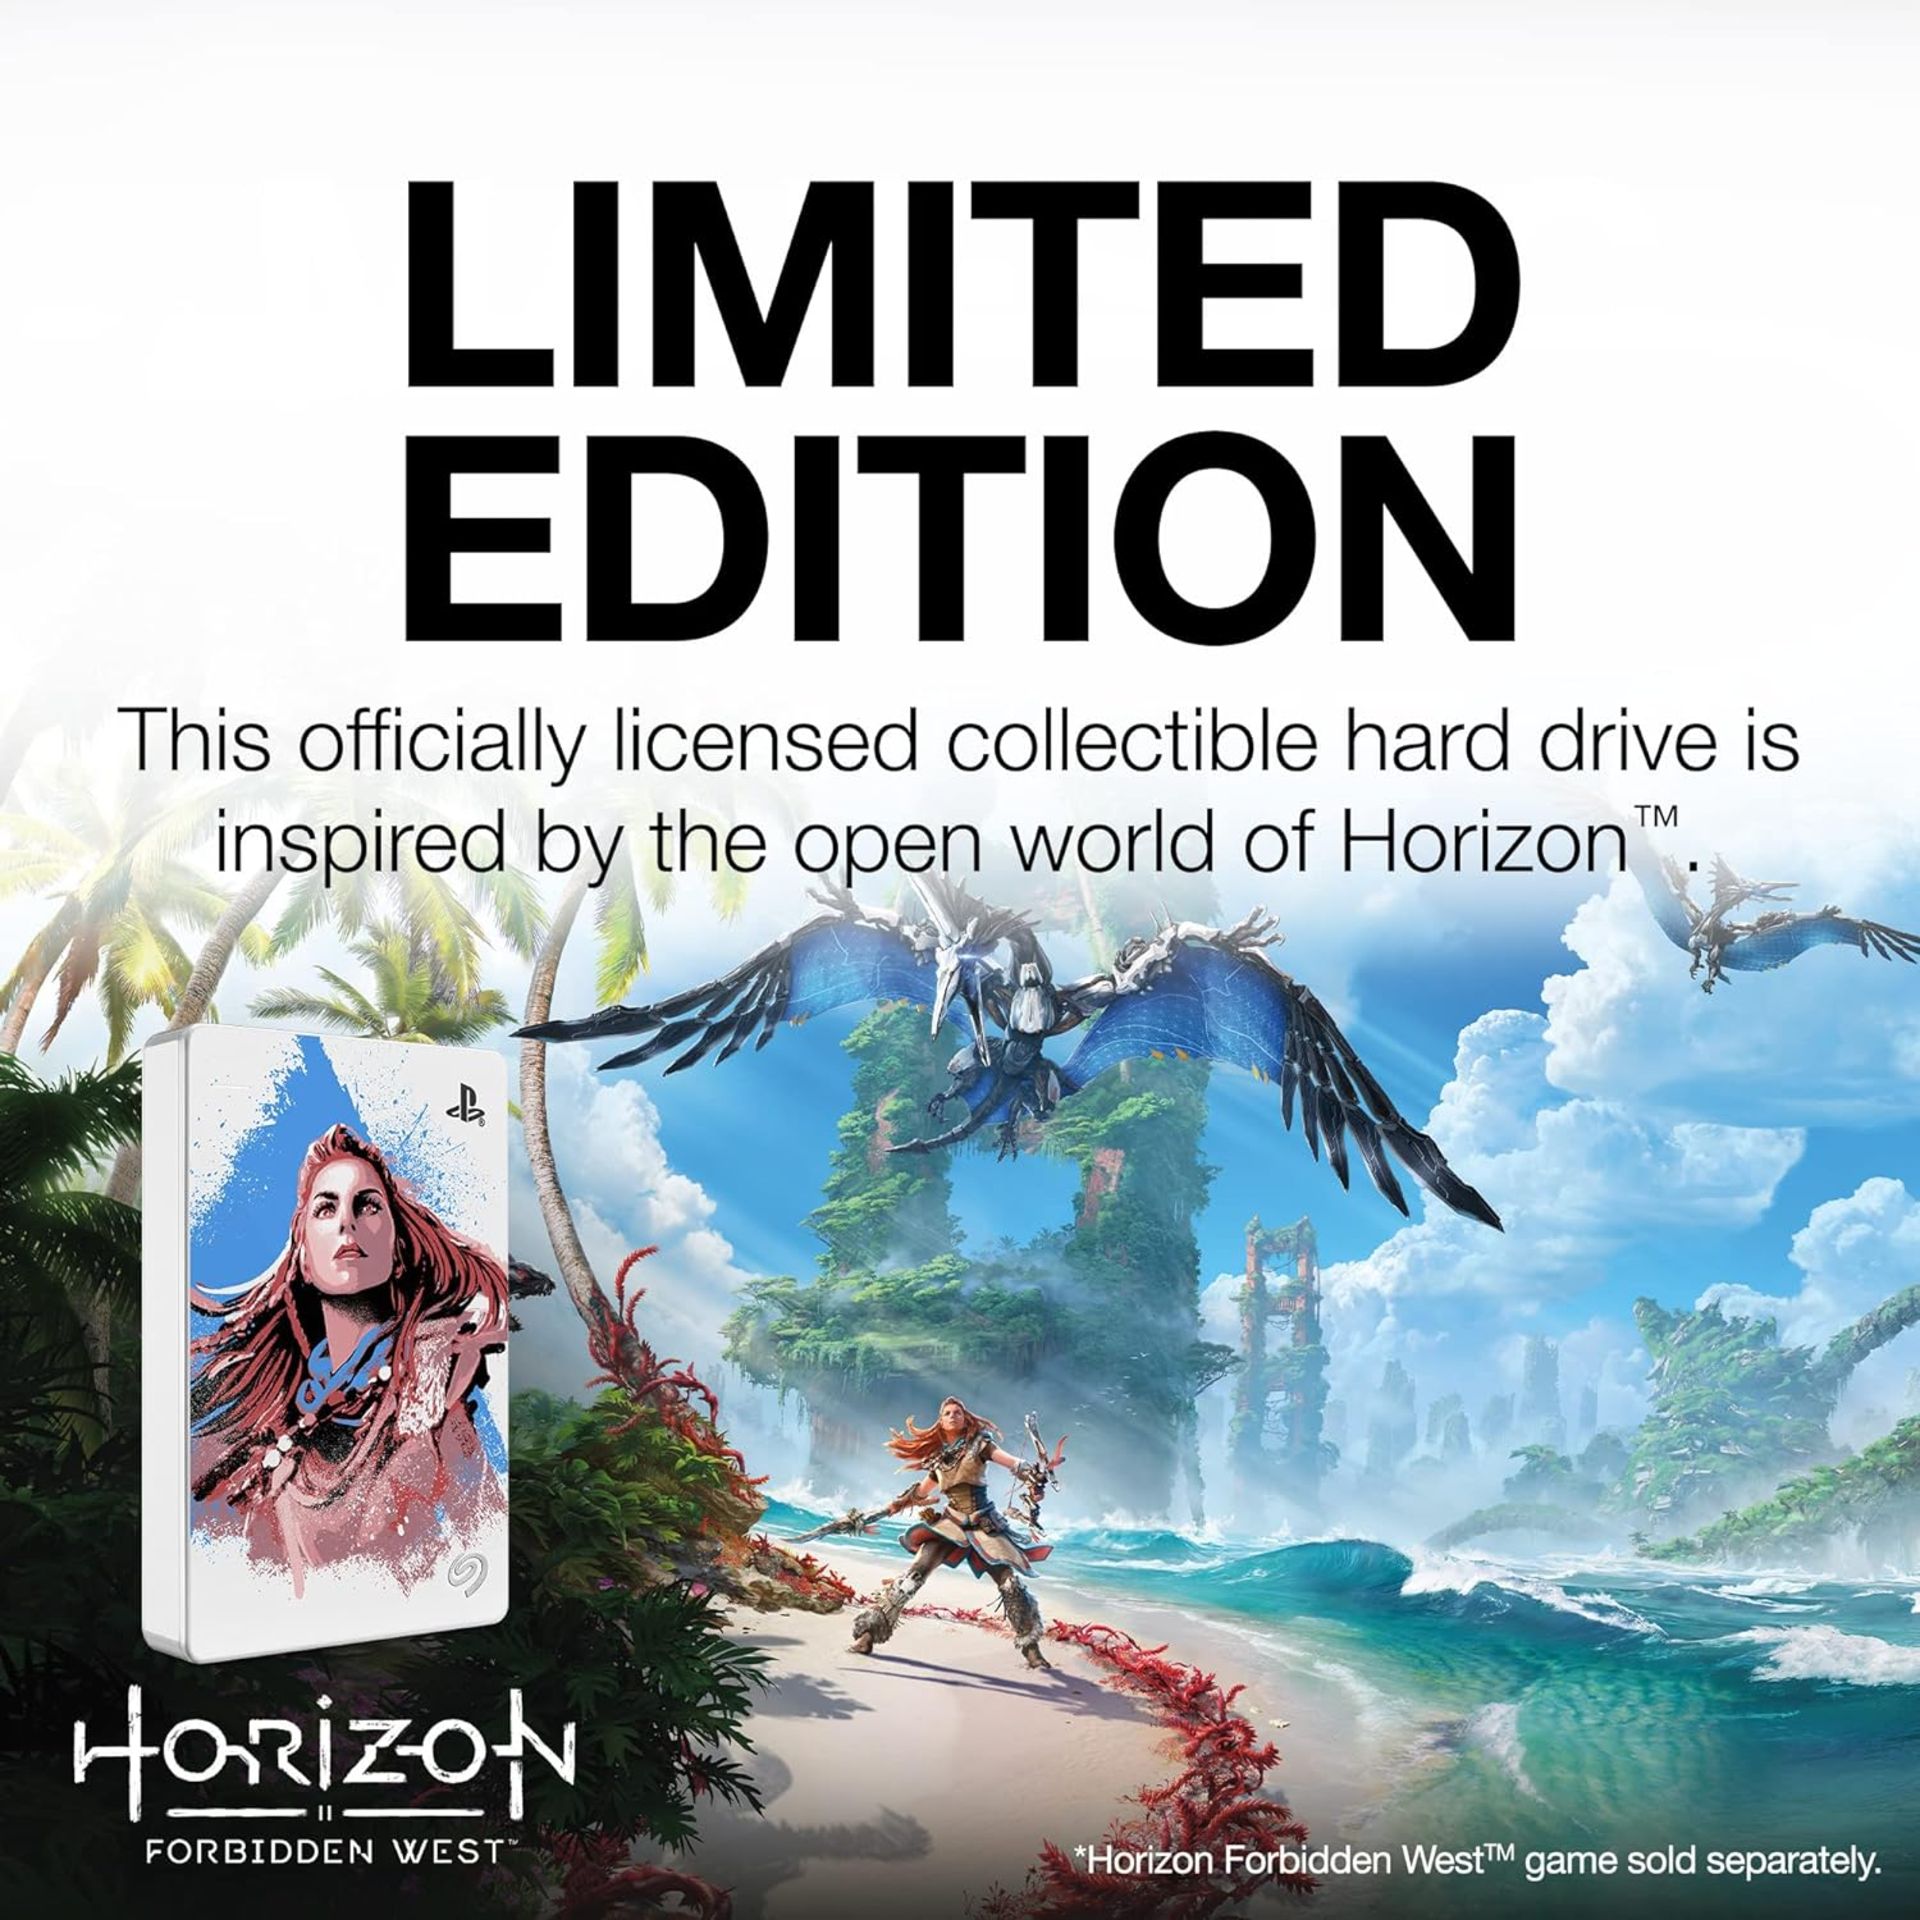 BRAND NEW FACTORY SEALED SEAGATE Horizon Forbidden West Limited Edition Game Drive 5TB. RRP £159.99. - Image 2 of 3